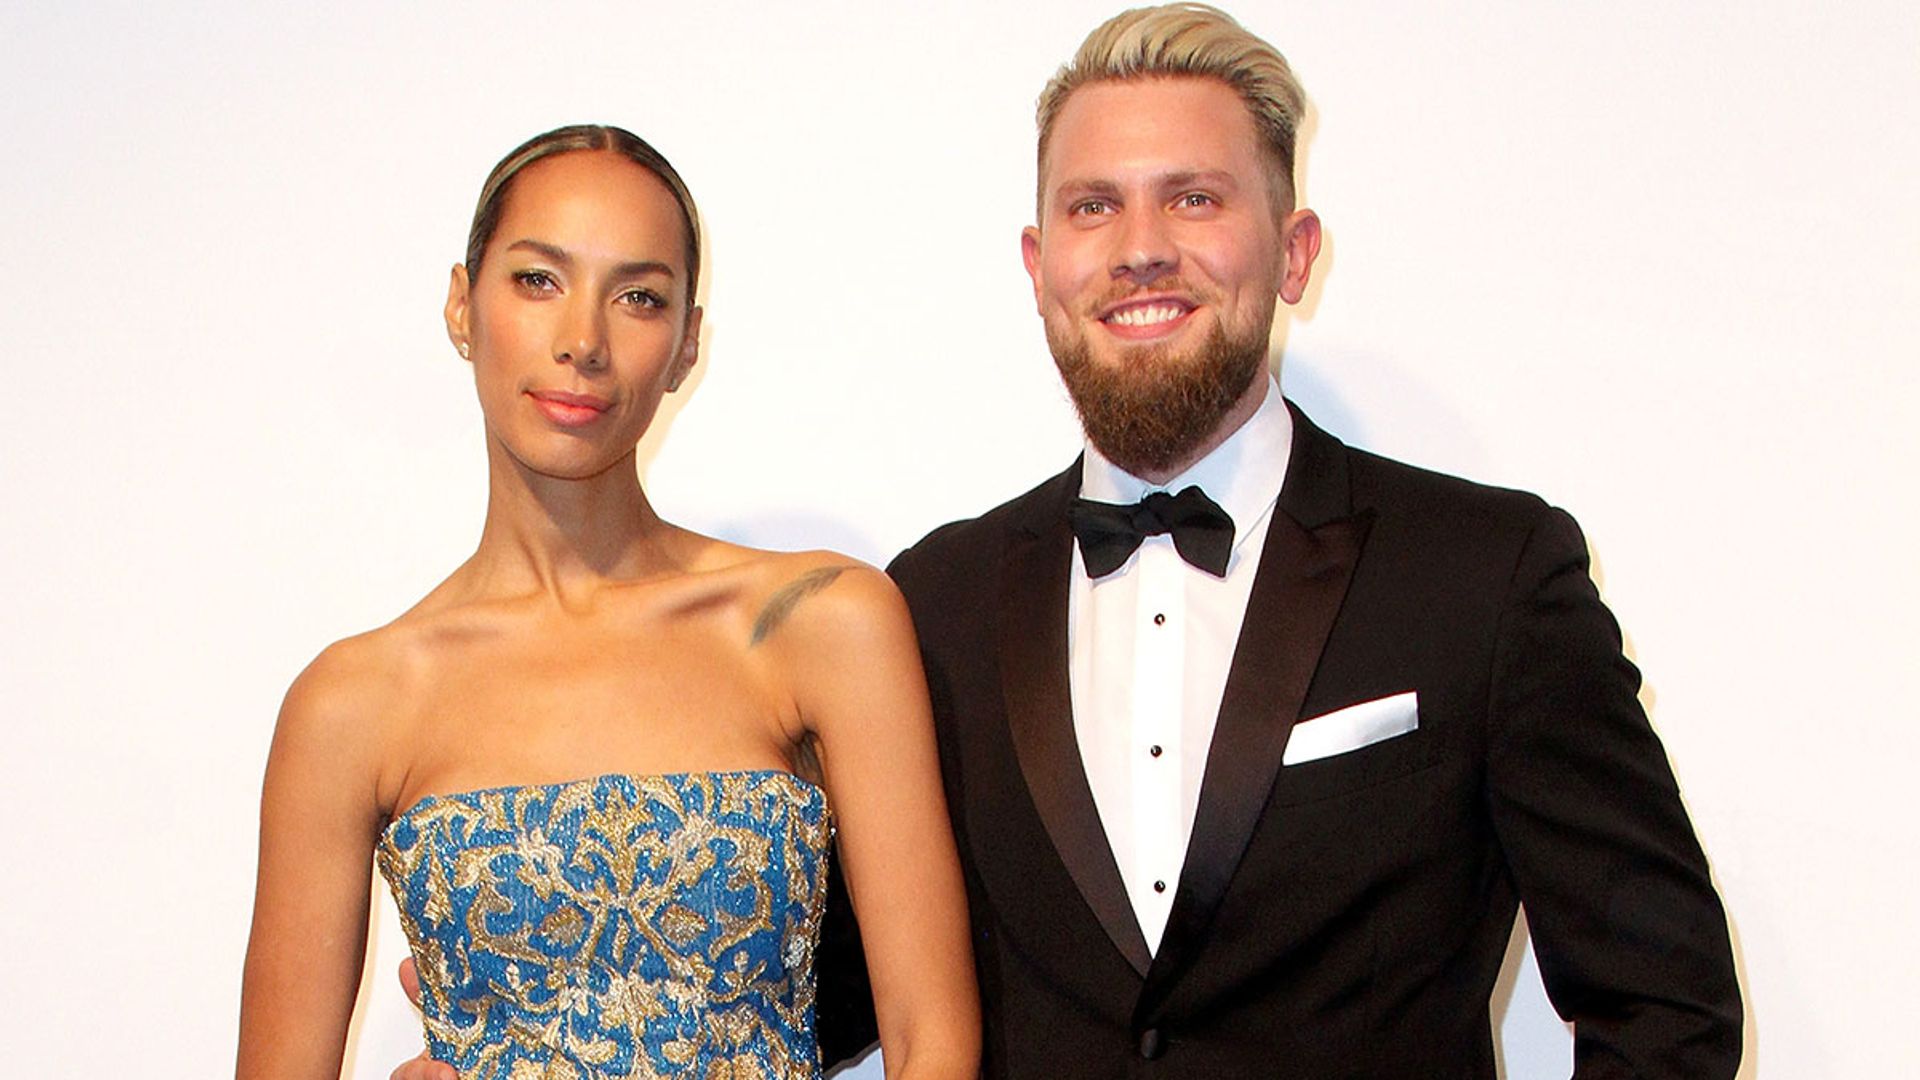 leona lewis and dennis marry